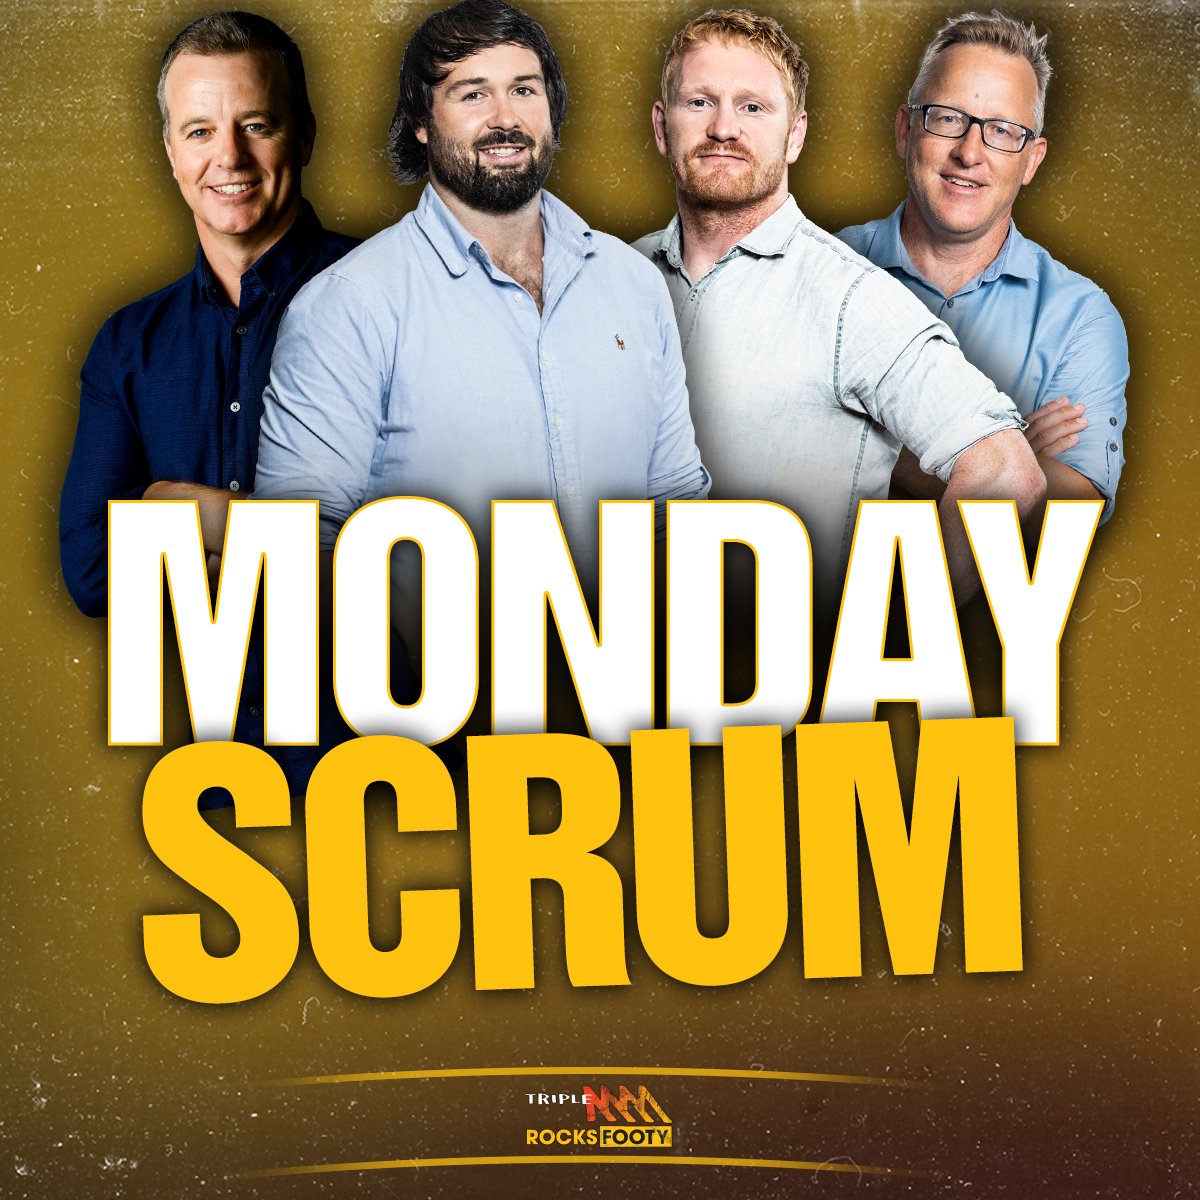 Monday Scrum | New Look QLD, Ryles The Man For Parra & Disaster For The Sharks!